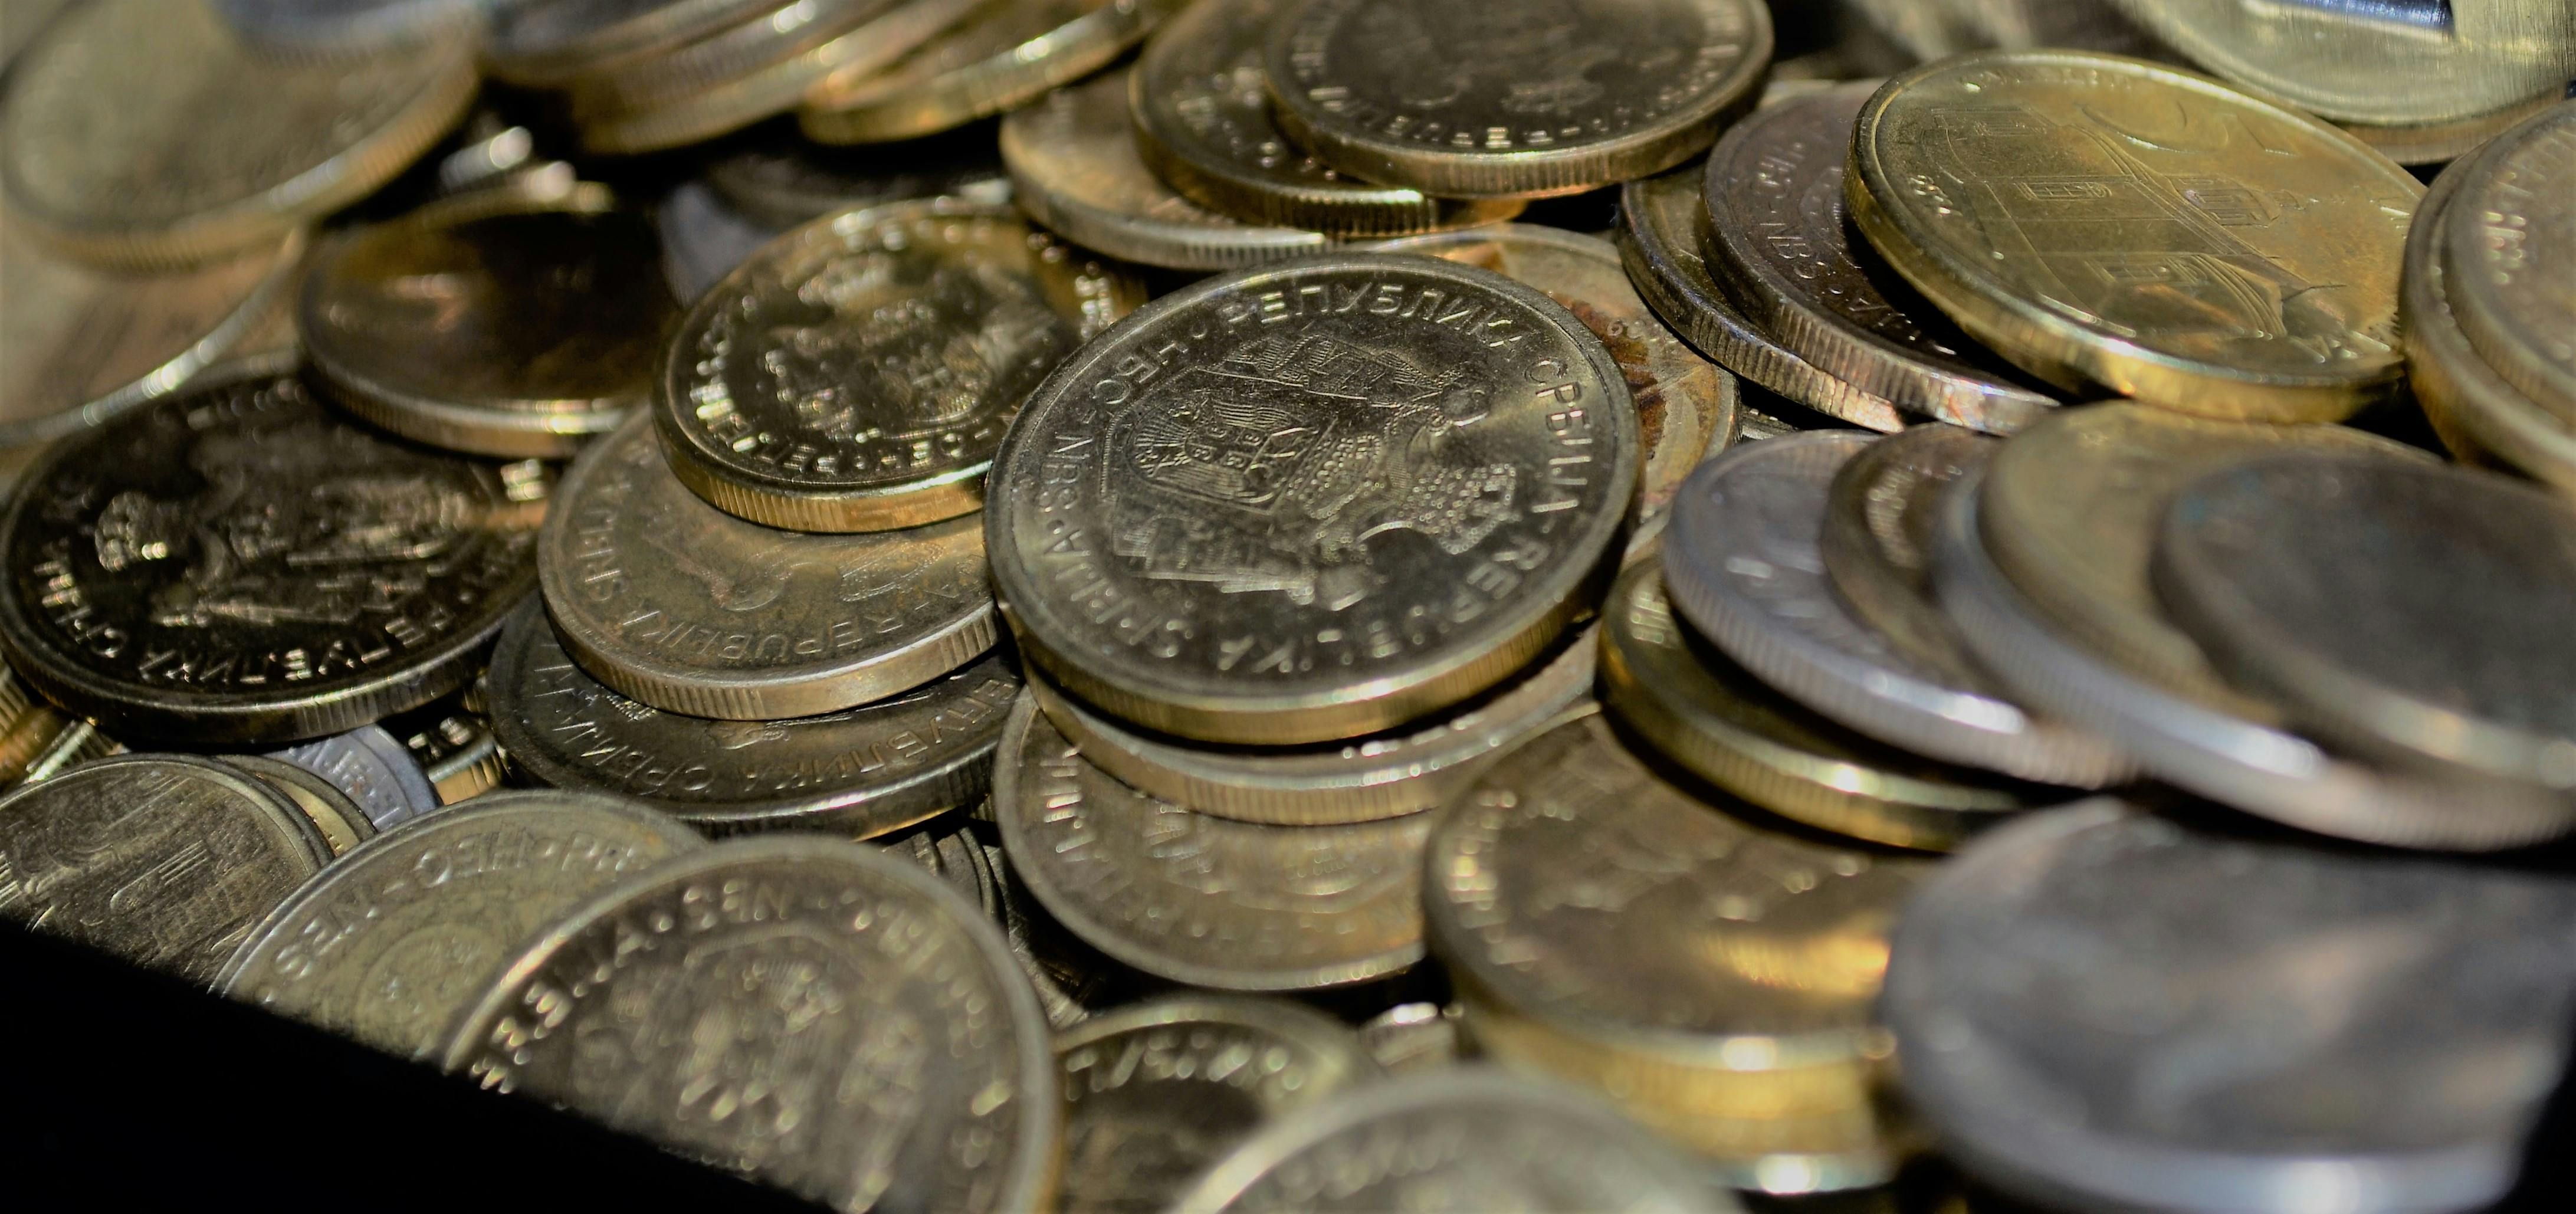 Free stock photo of coins, stack of coins